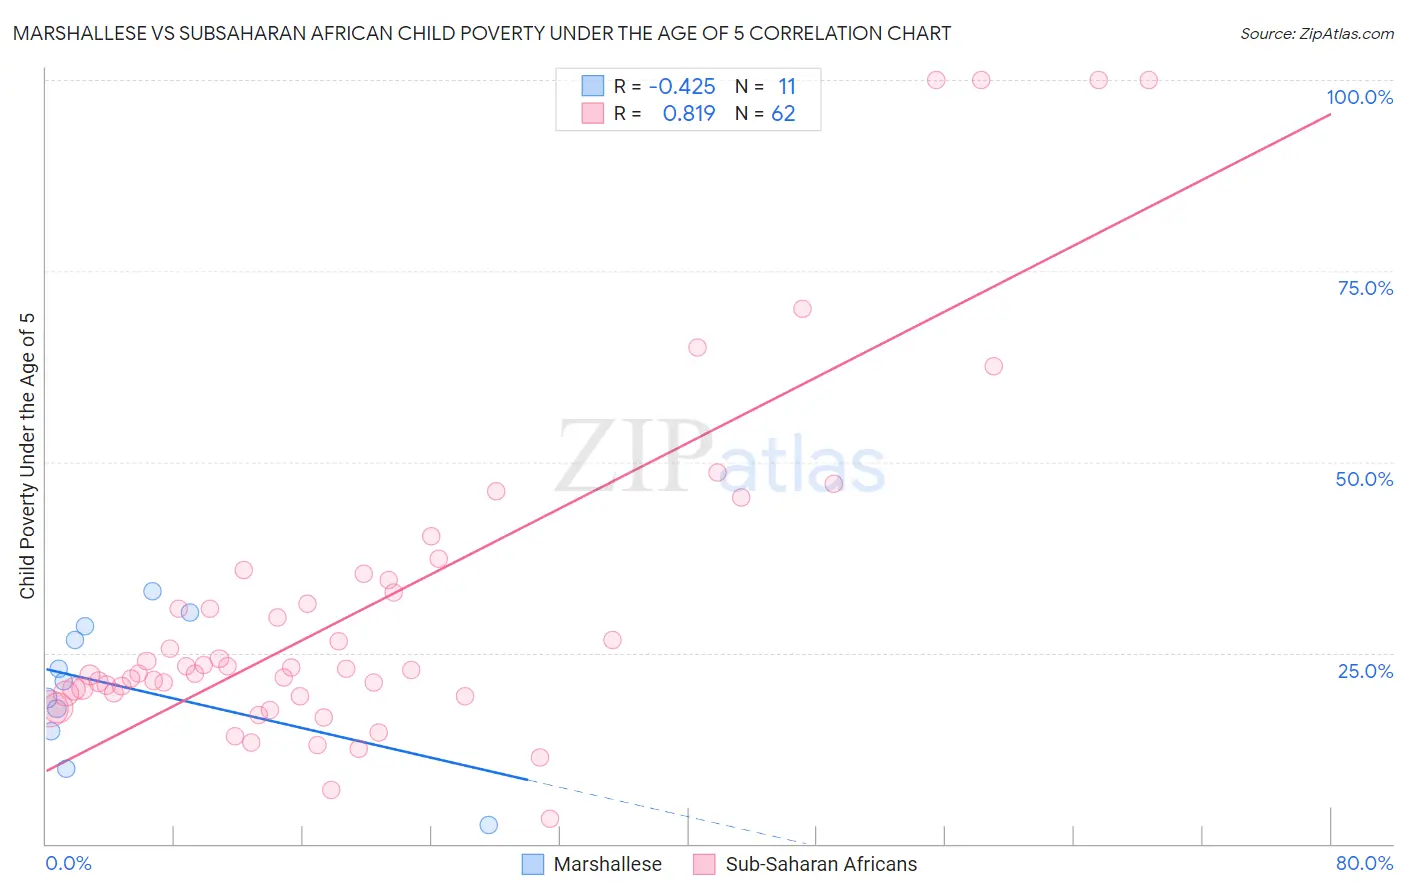 Marshallese vs Subsaharan African Child Poverty Under the Age of 5